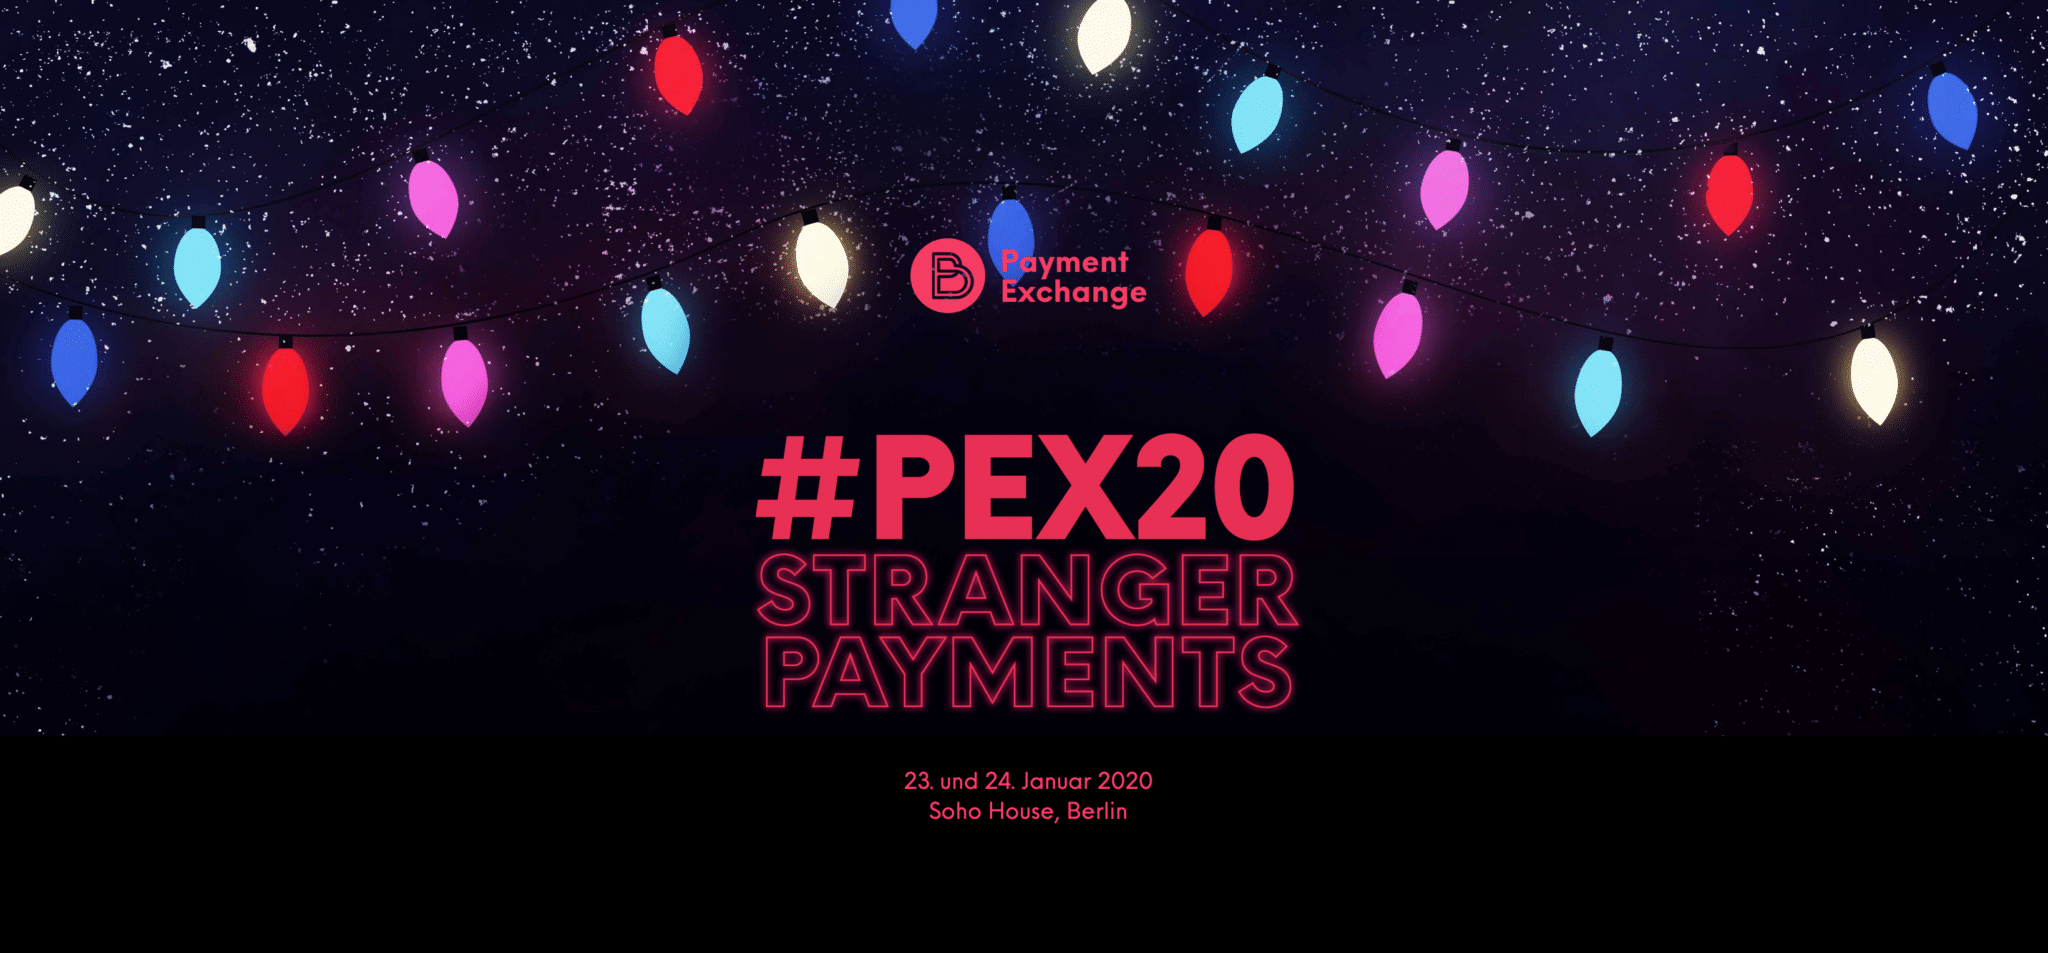 Payment Exchange 2020 - Fintech Podcast #243